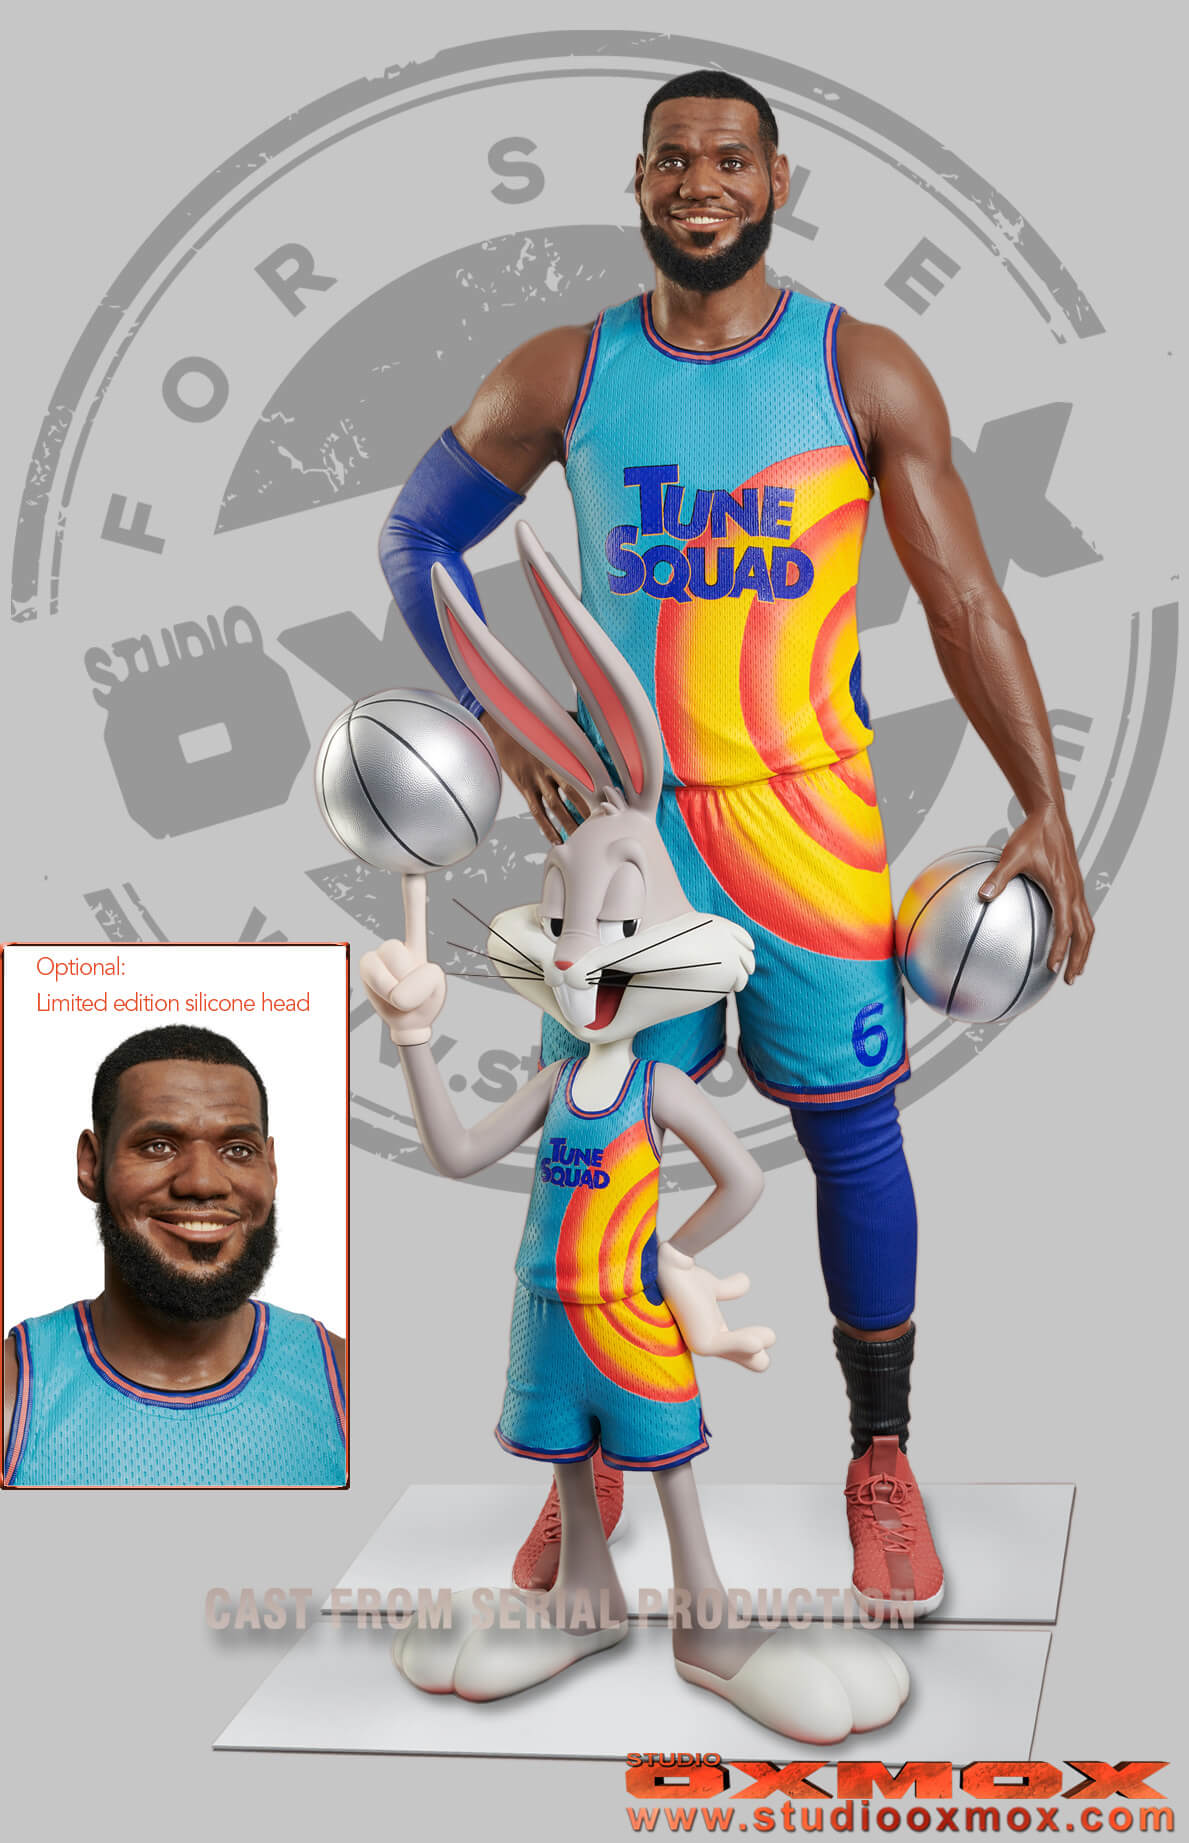 Space Jam, Lebron James life size statue with silicone head and Bugs Bunny